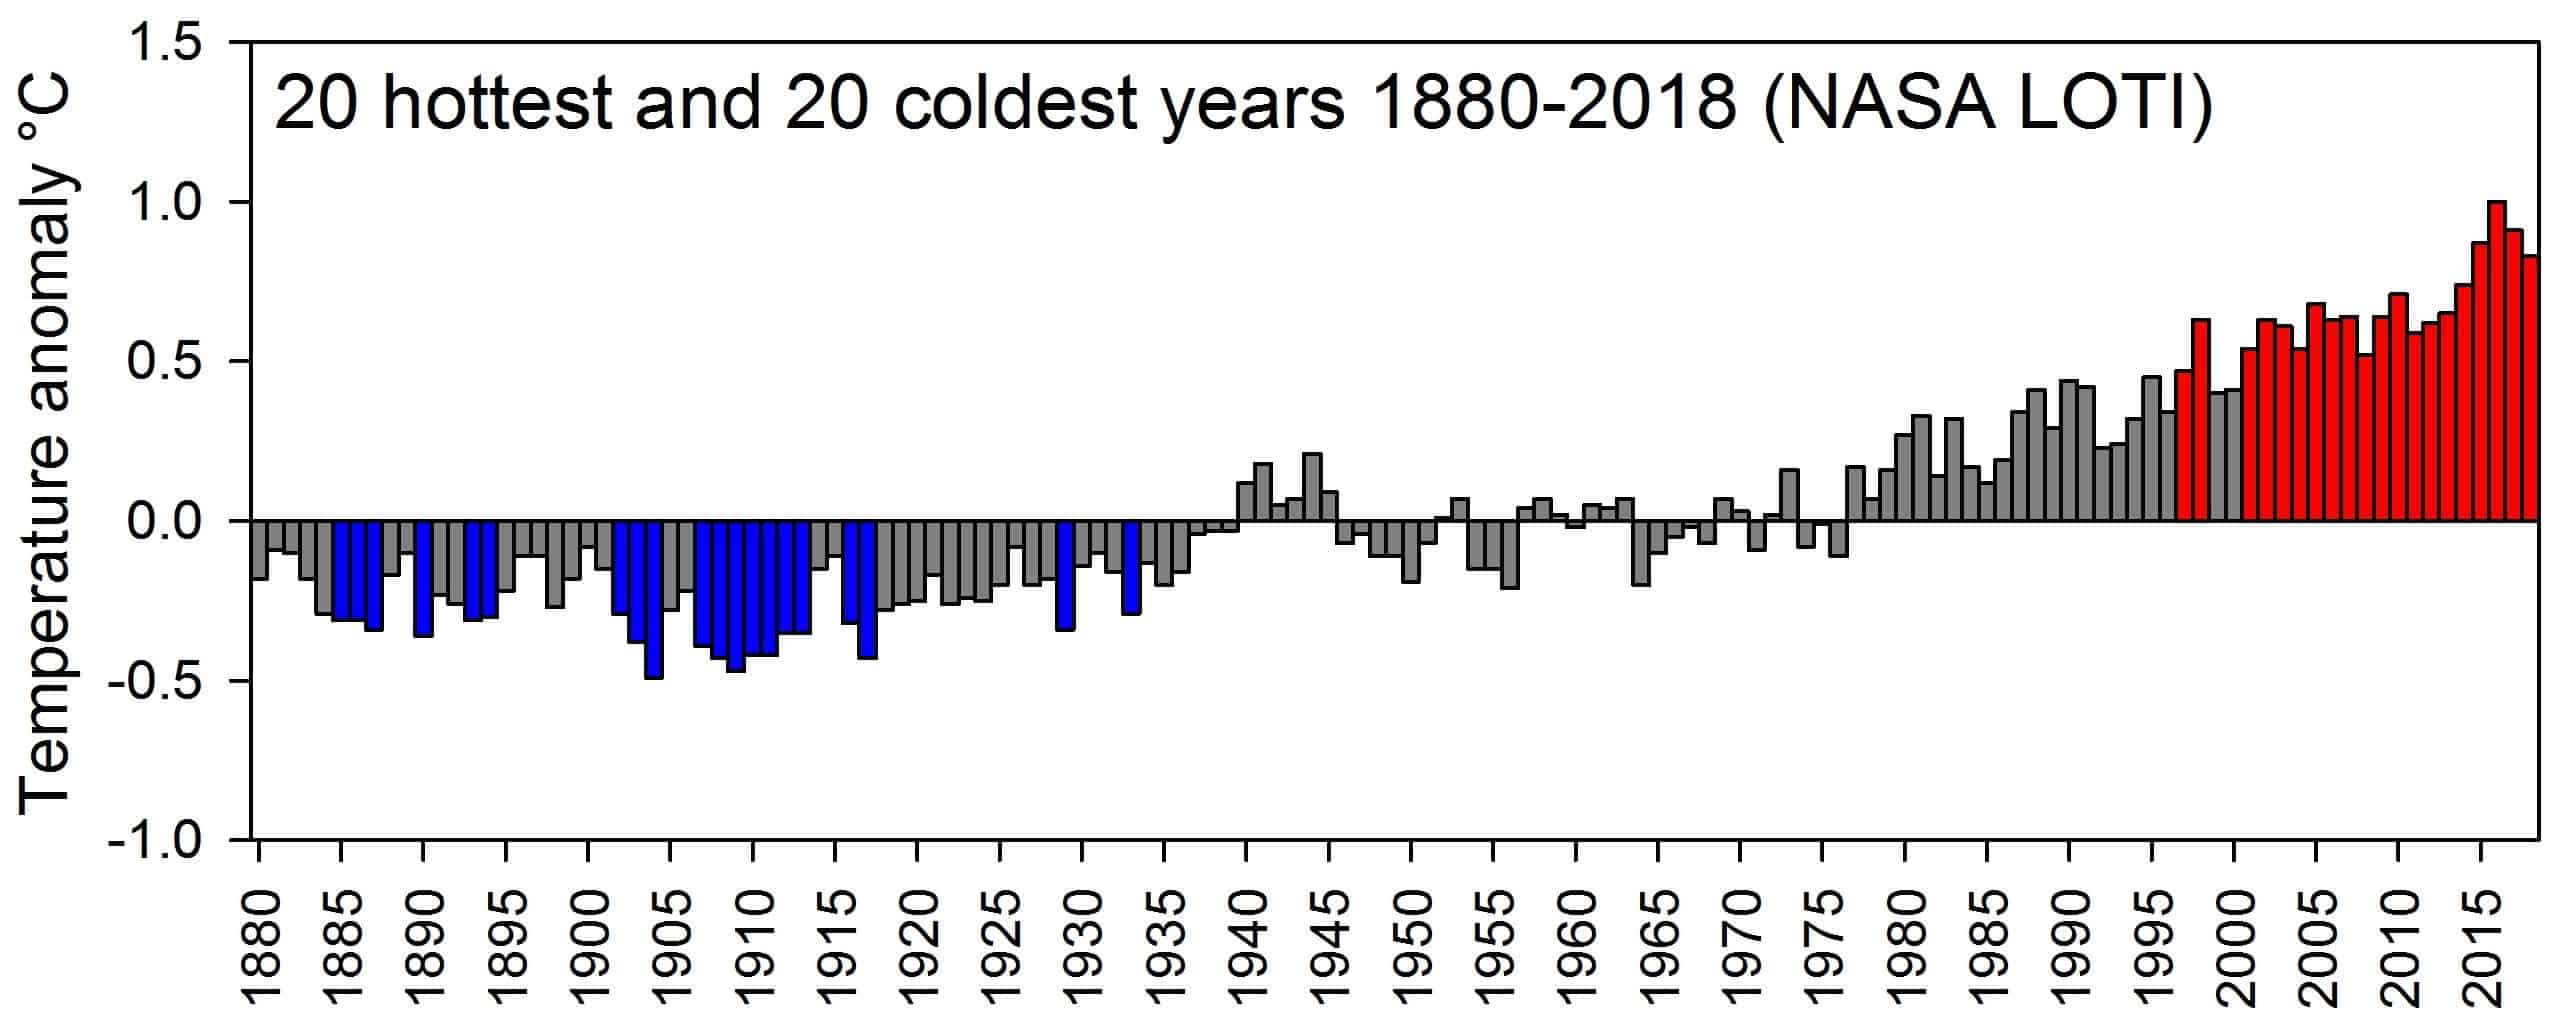 Global average annual temperature anomalies from NASA’s global Land-Ocean Temperature Index data set (1951-1980 base period). Graph and highlight credits: Logic of Science.